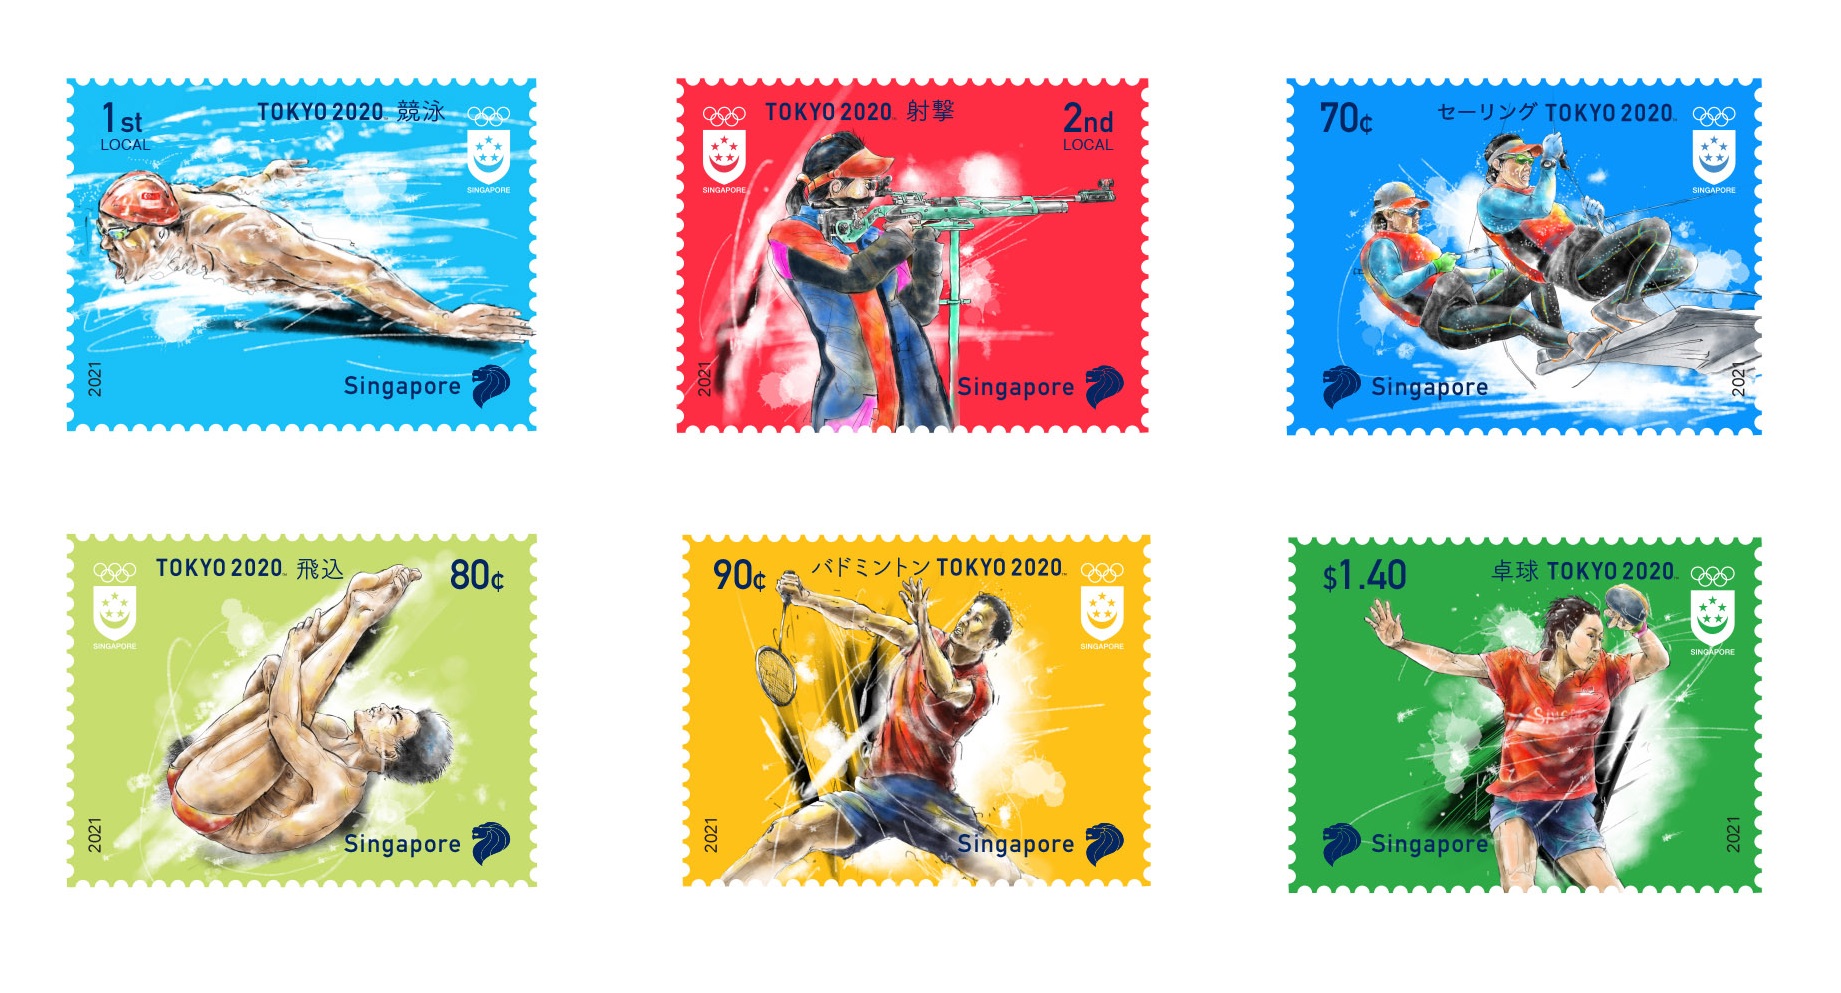 SingPost issues commemorative set of stamps in celebration of the Tokyo 2020 Summer Olympic Games